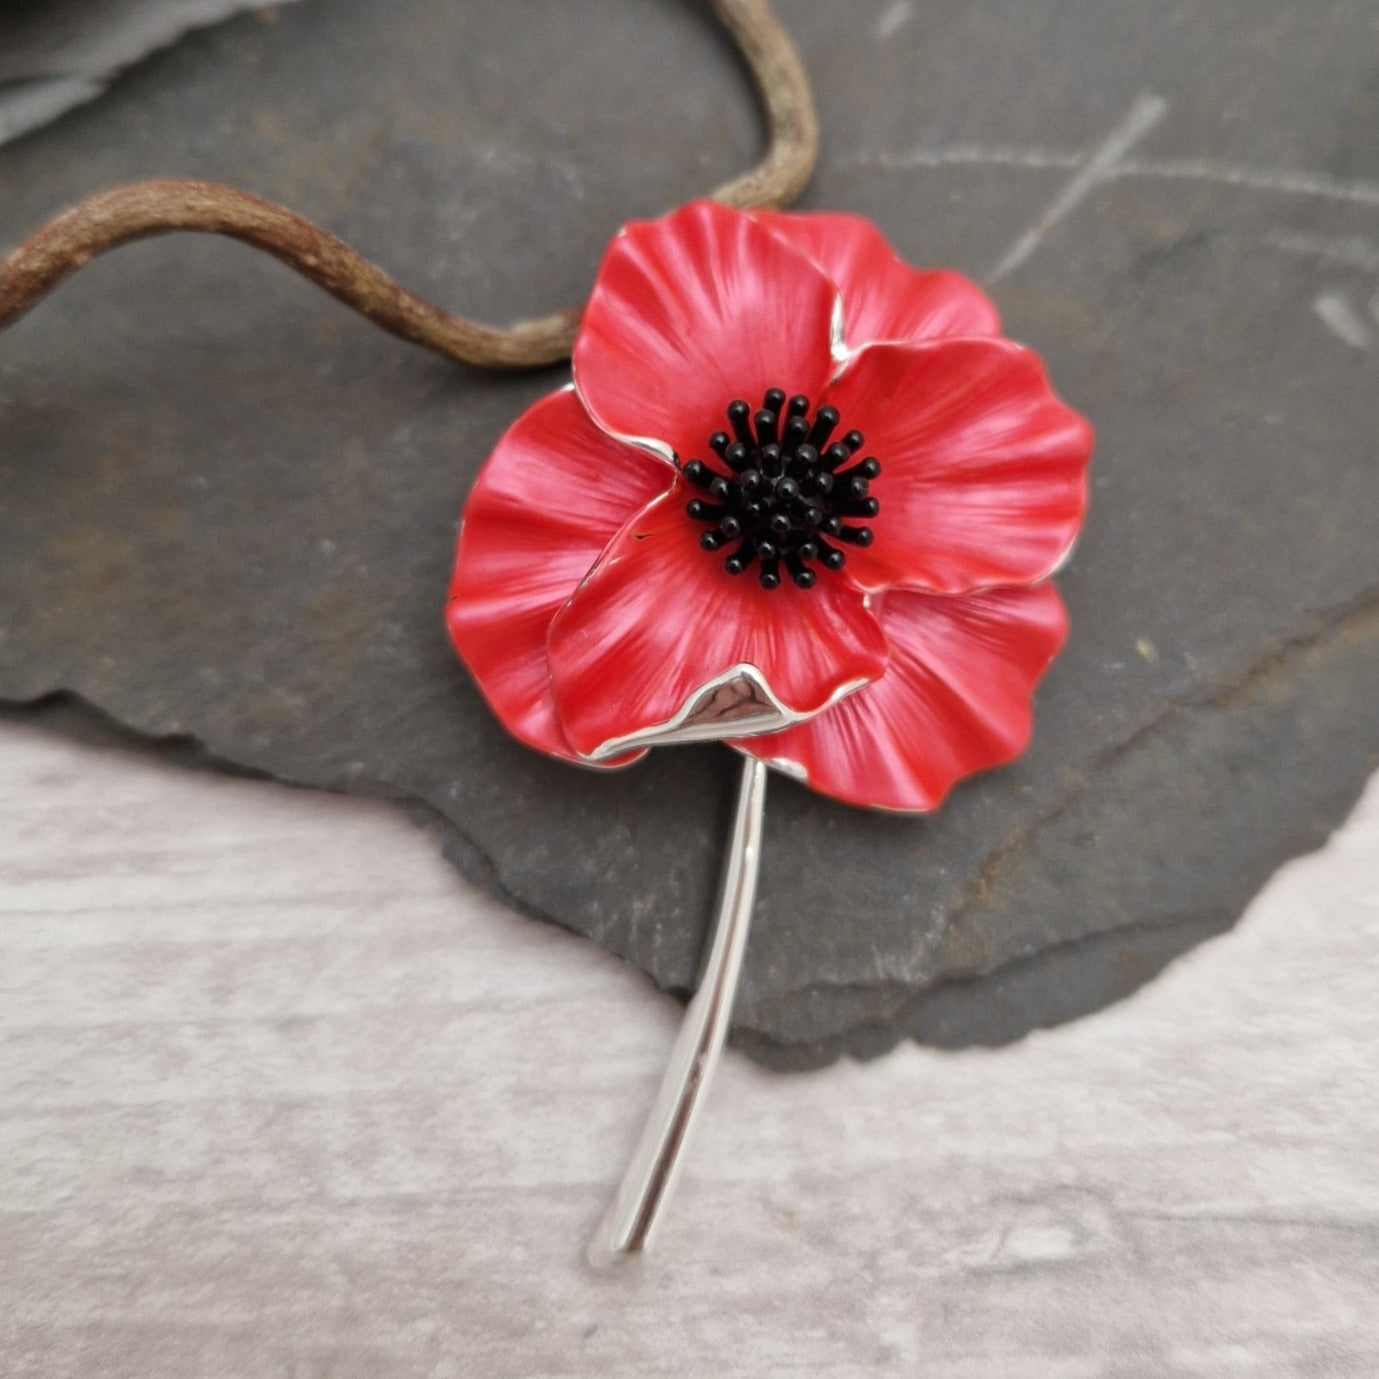 Striking red poppy brooch with black centred stamen and a long silver stem.